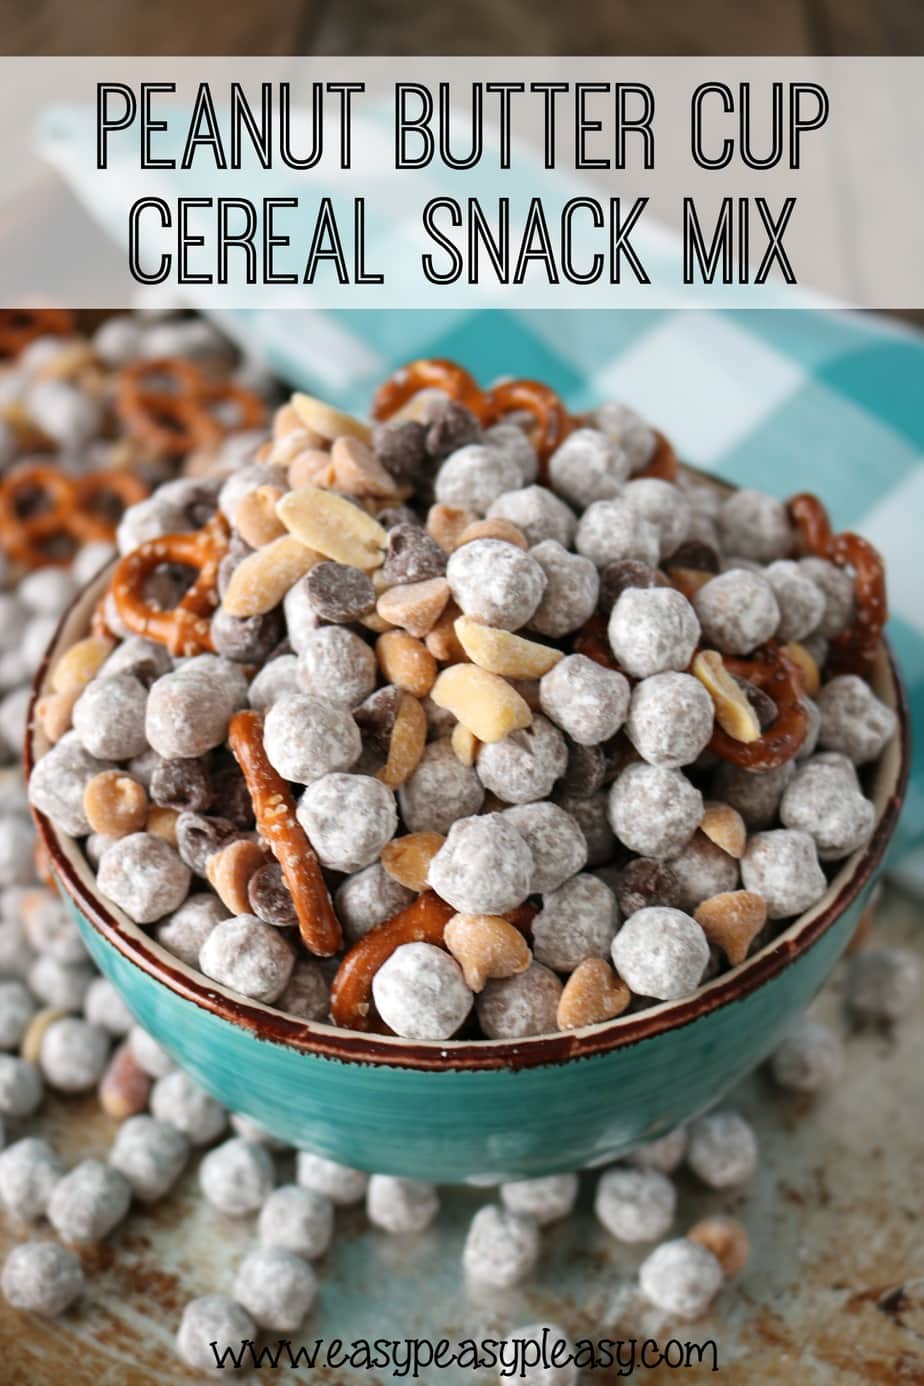 Make this super easy cereal snack mix and be the winning mom!! (ad)